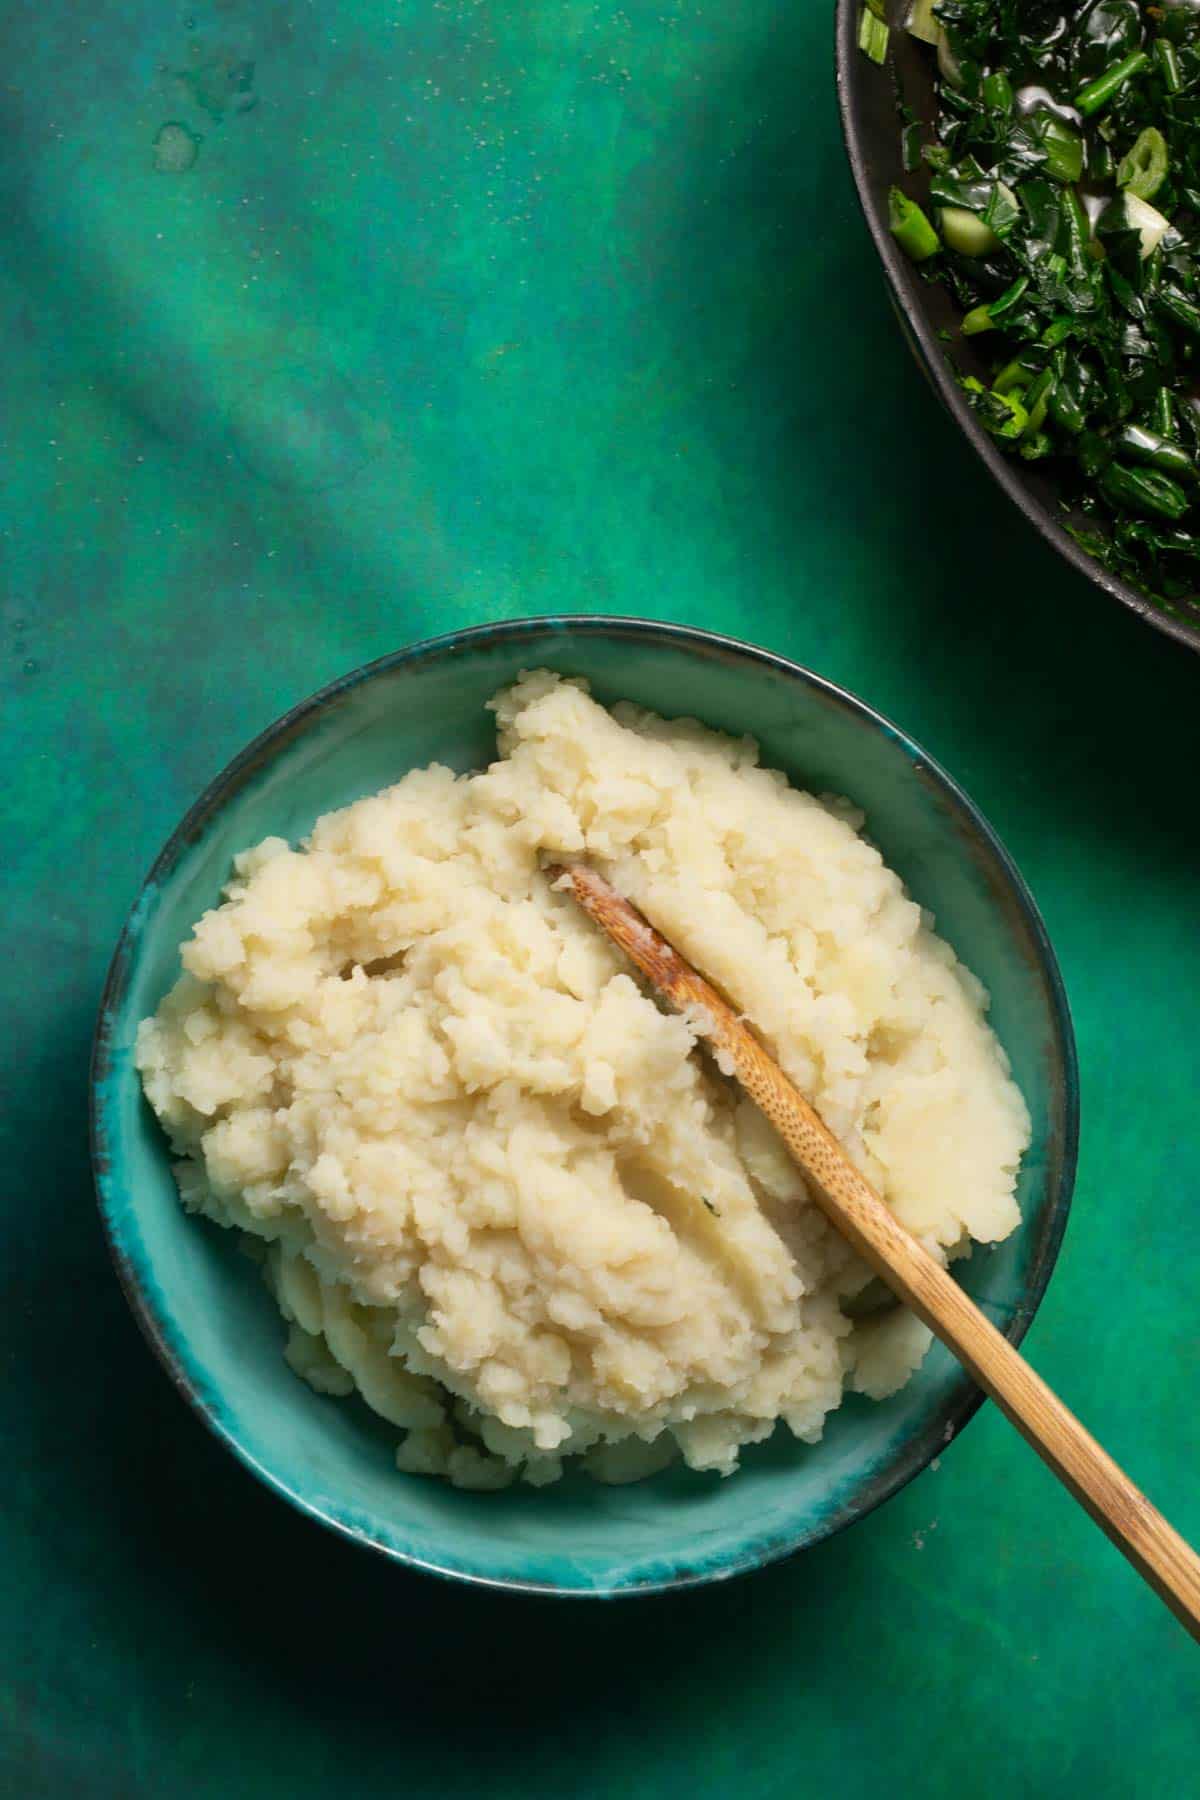 A bowl of mashed potatoes and a bowl of greens.